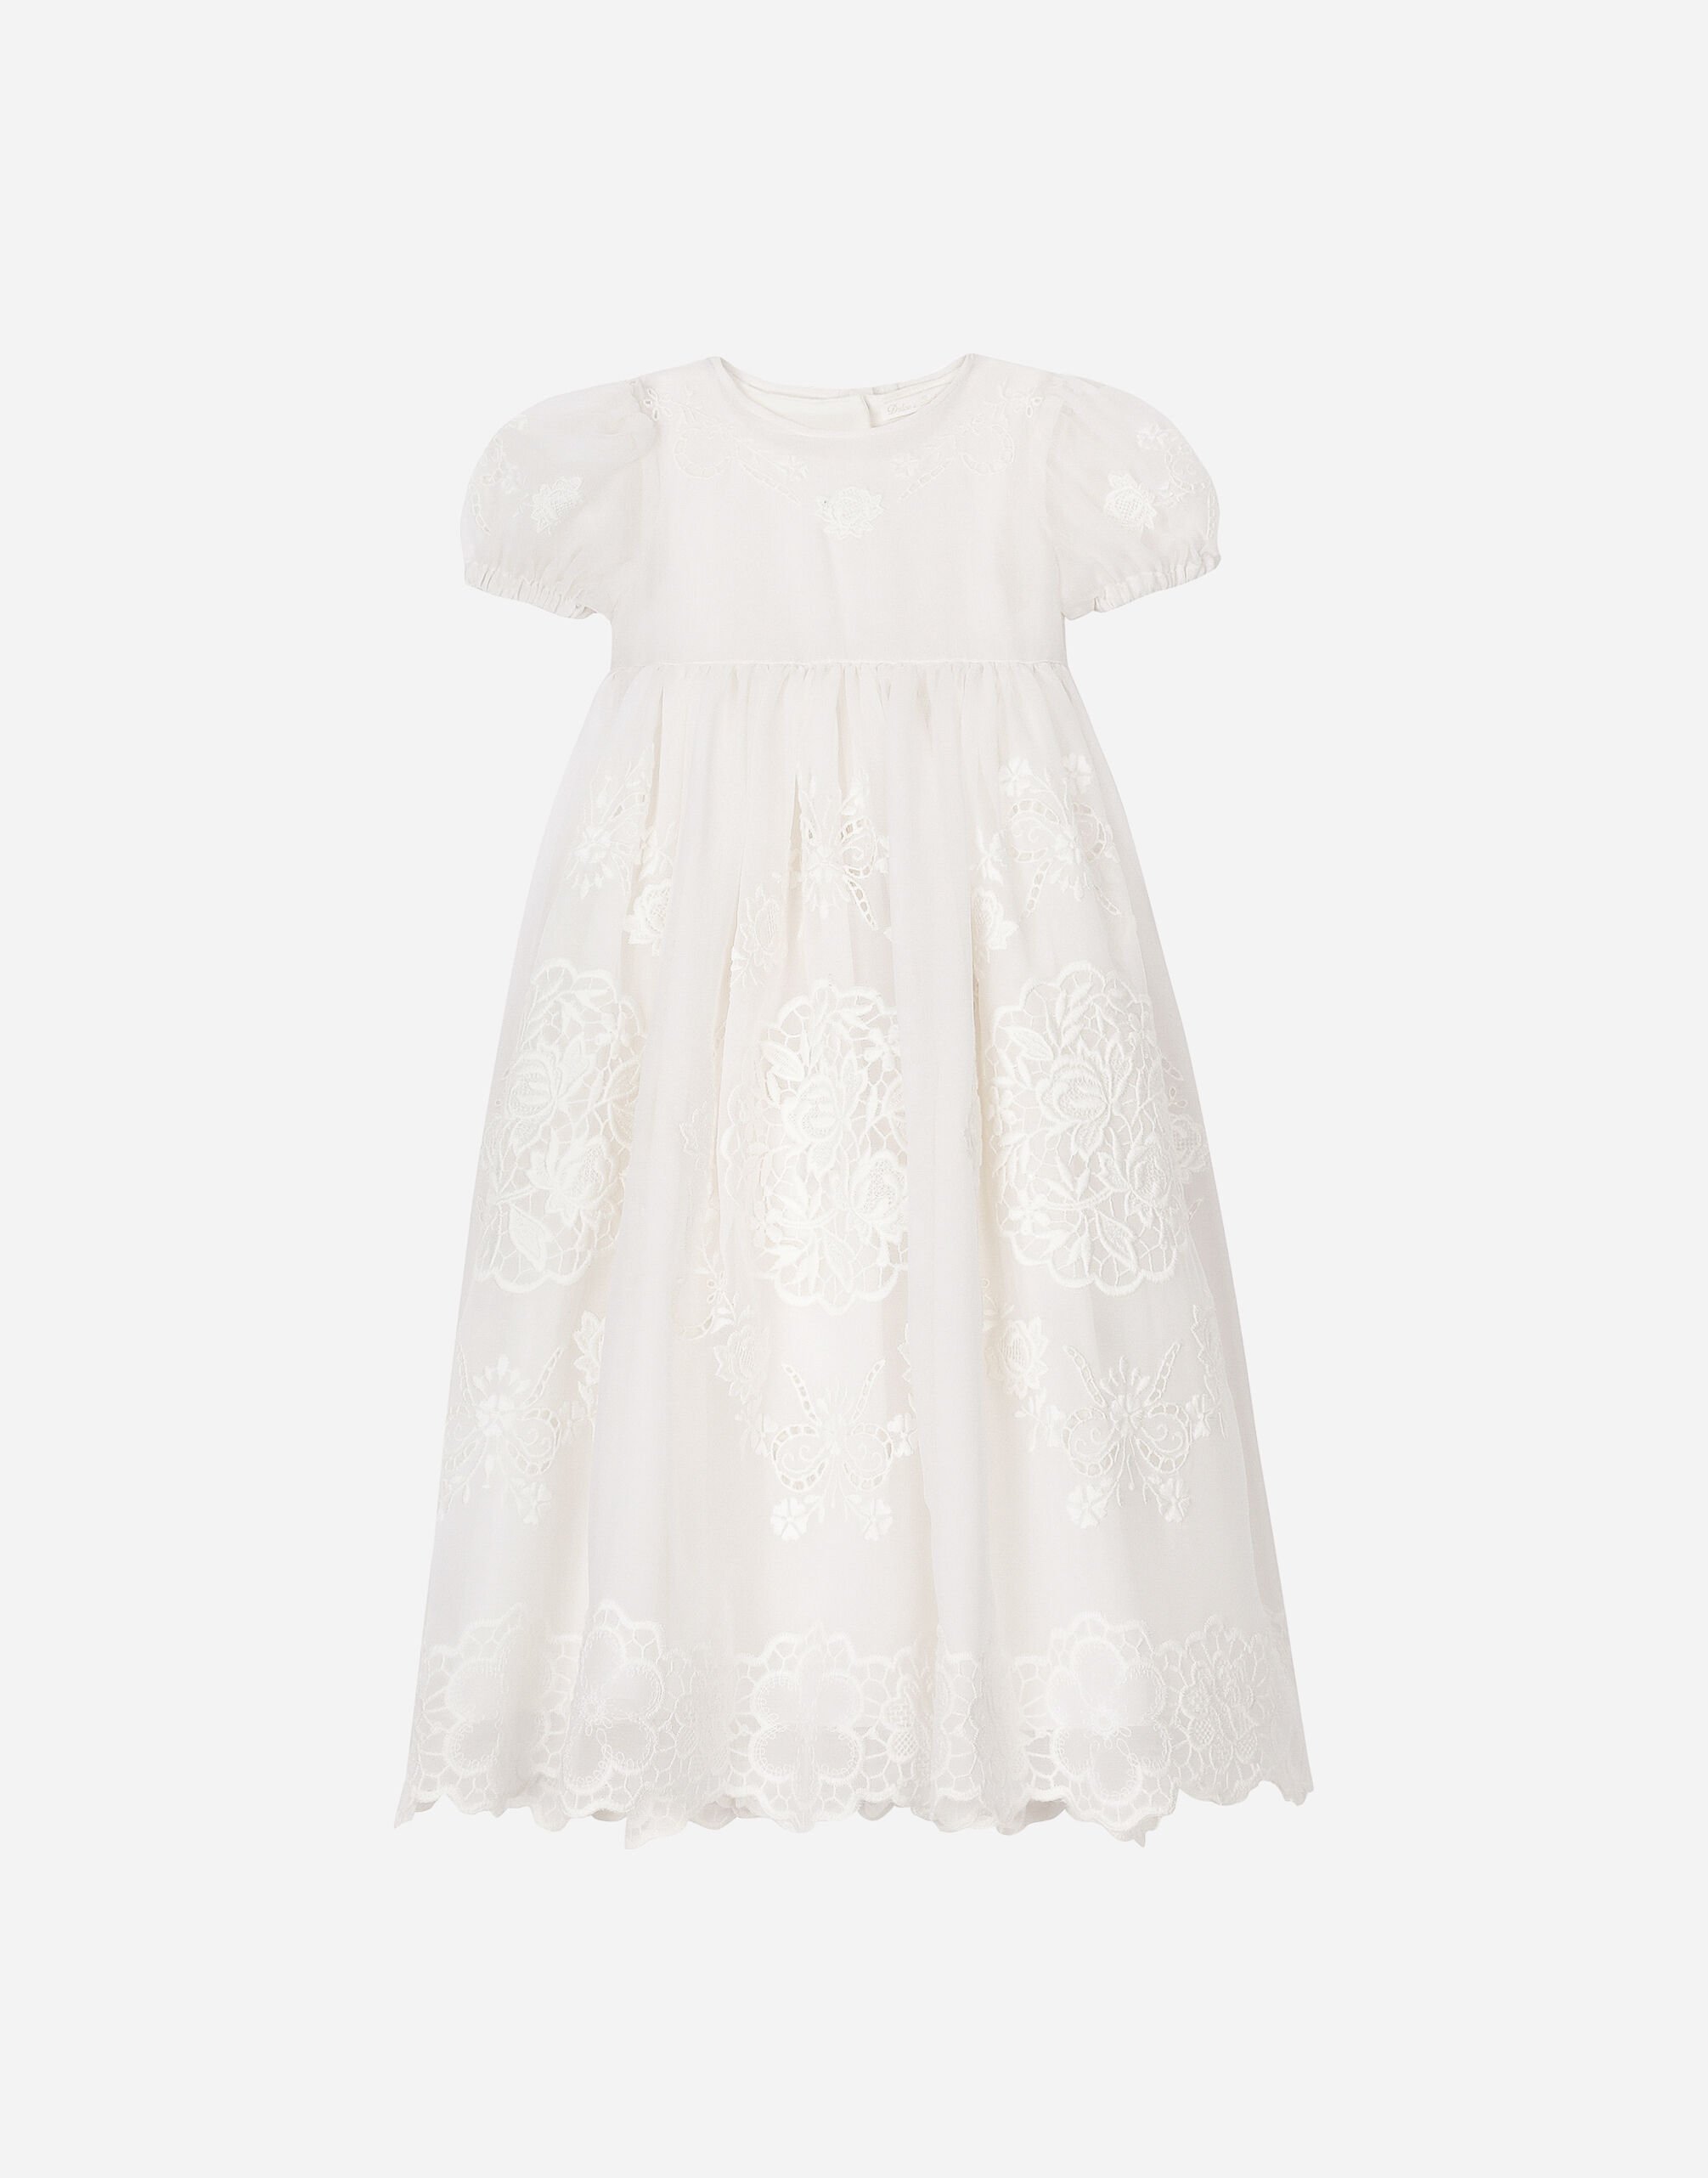 Dolce & Gabbana Empire-line embroidered chiffon christening dress with short sleeves White L0EGG2FU1L6